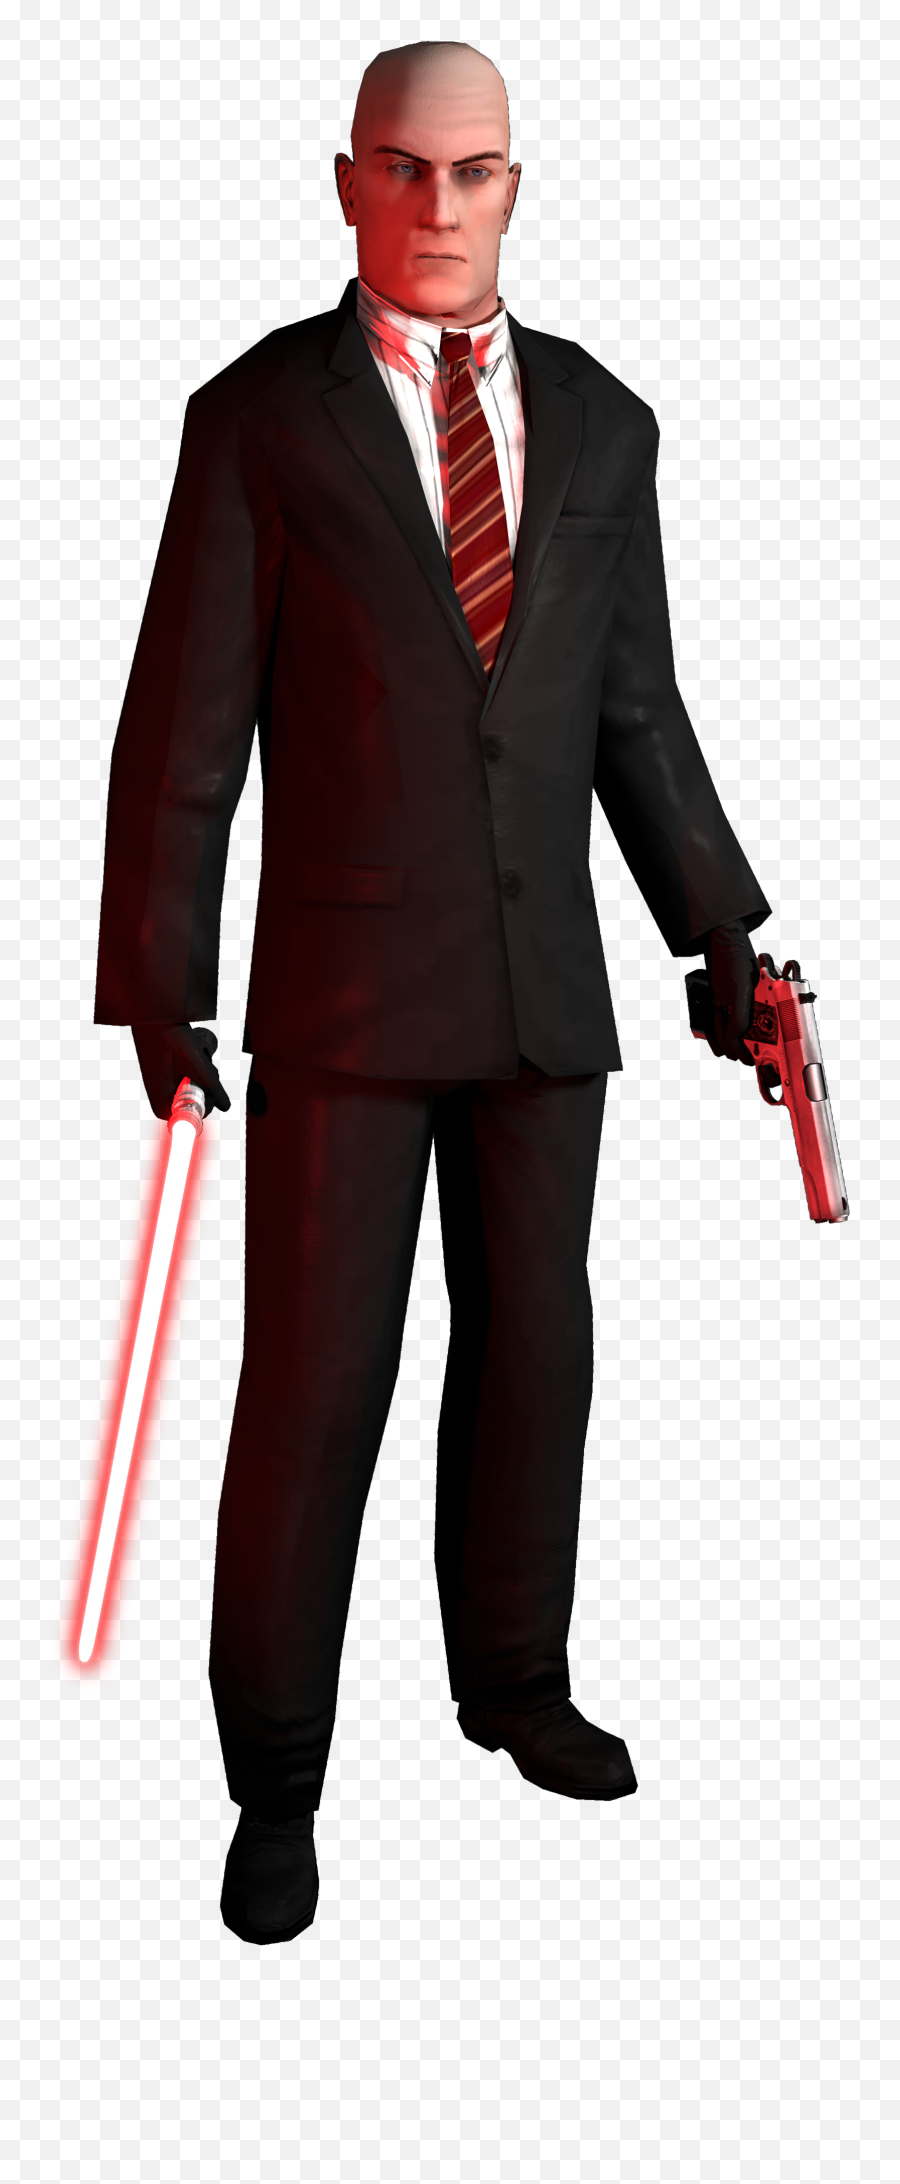 Png Image With Transparent Background - Hitman Codename 47 Suit,Hitman Png